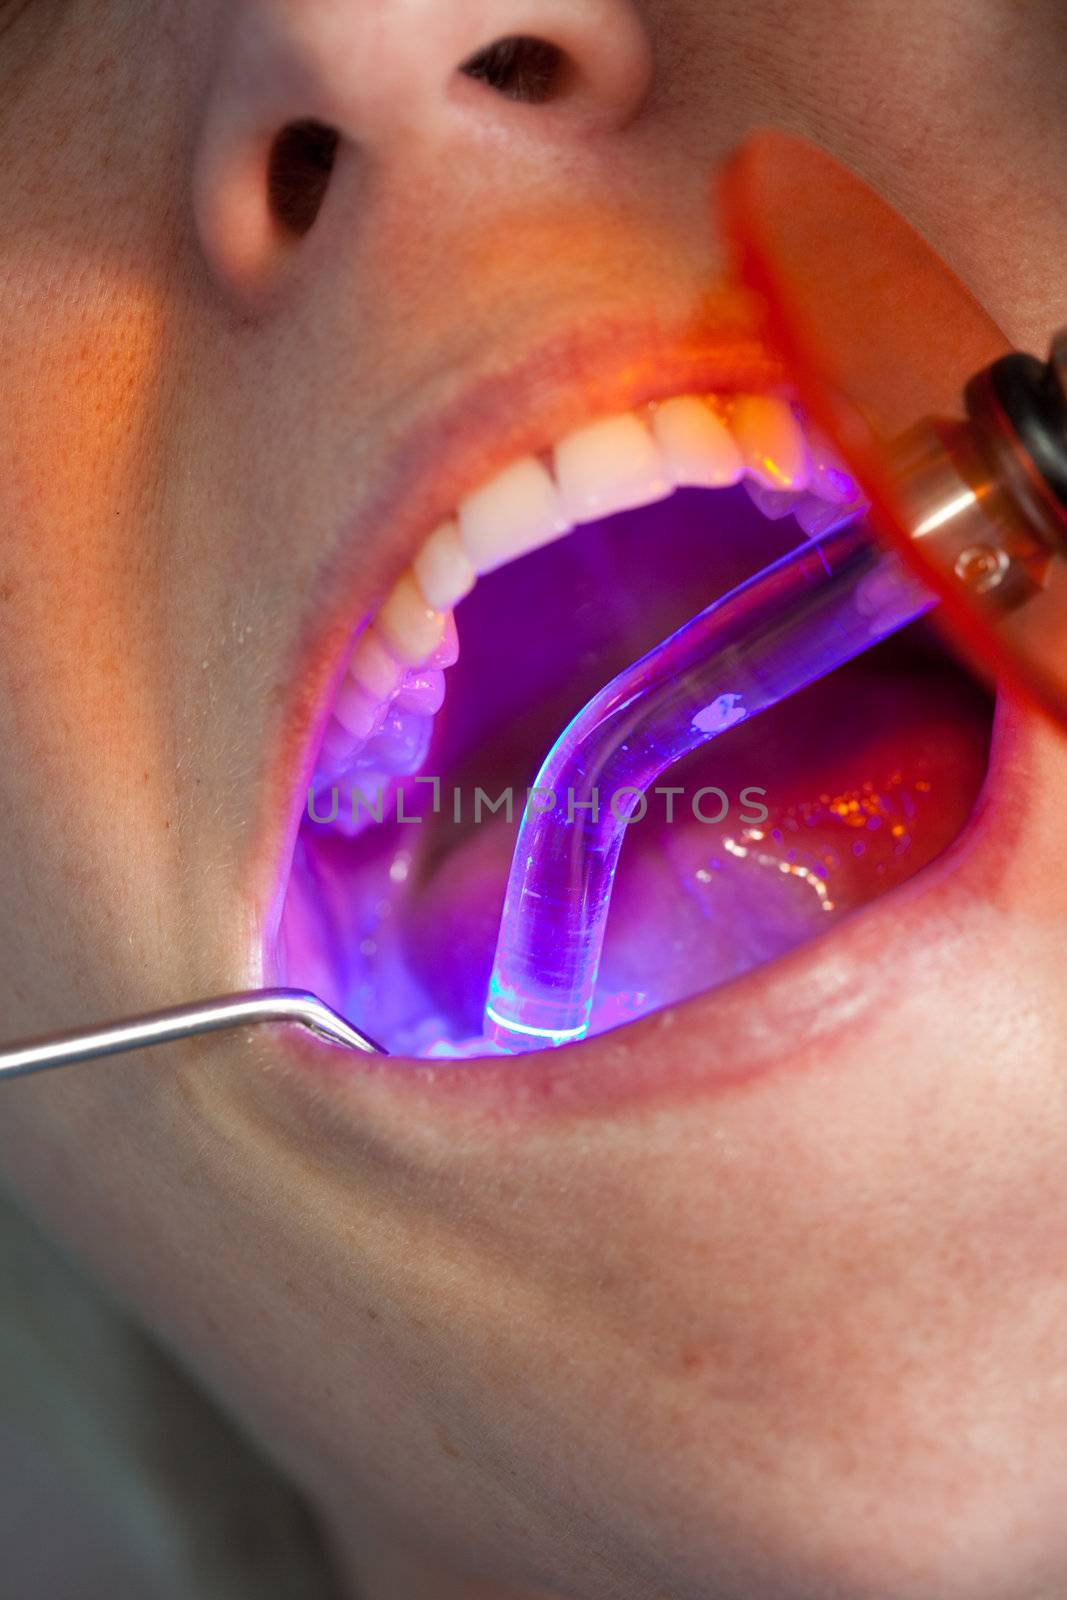 Drying of the dental filling by Fotosmurf